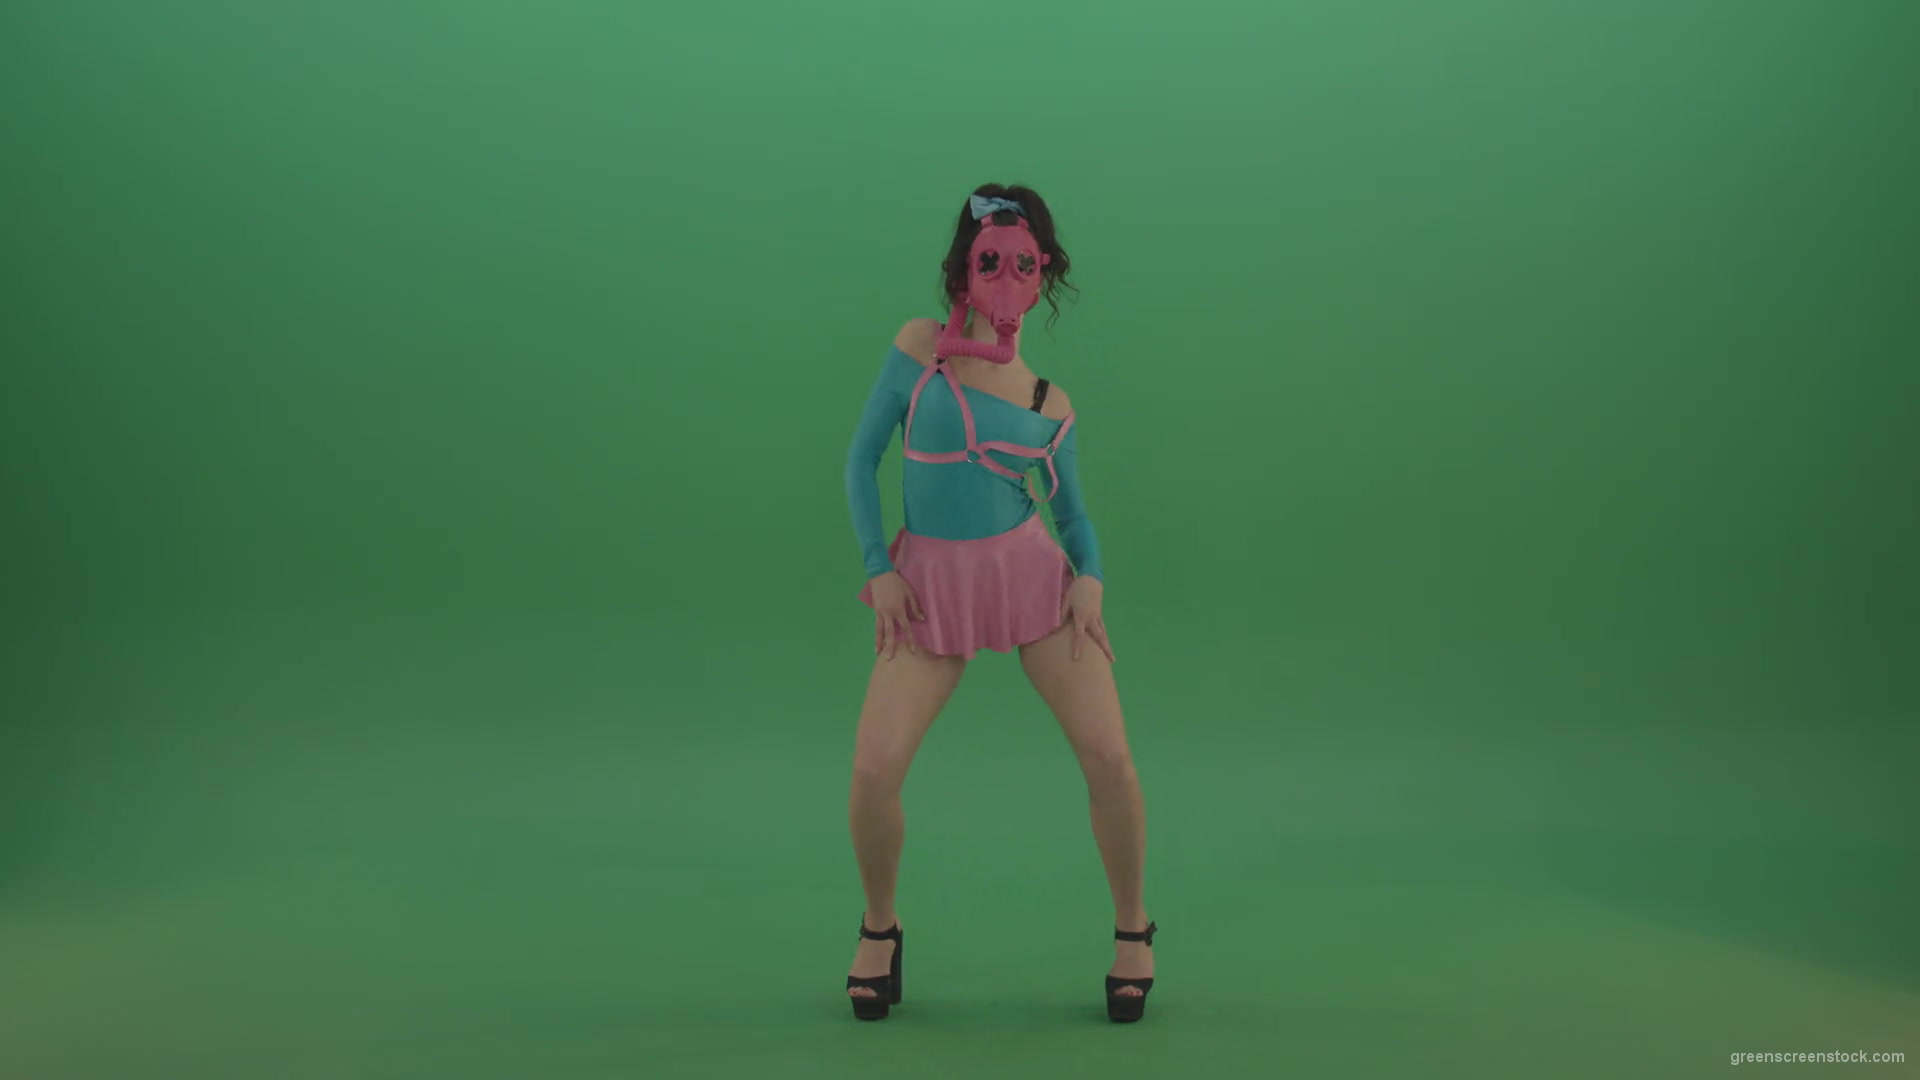 Fetish-Go-Go-Girl-dancing-in-pink-gas-mask-over-green-screen-4K-Video-Footage-1920_007 Green Screen Stock